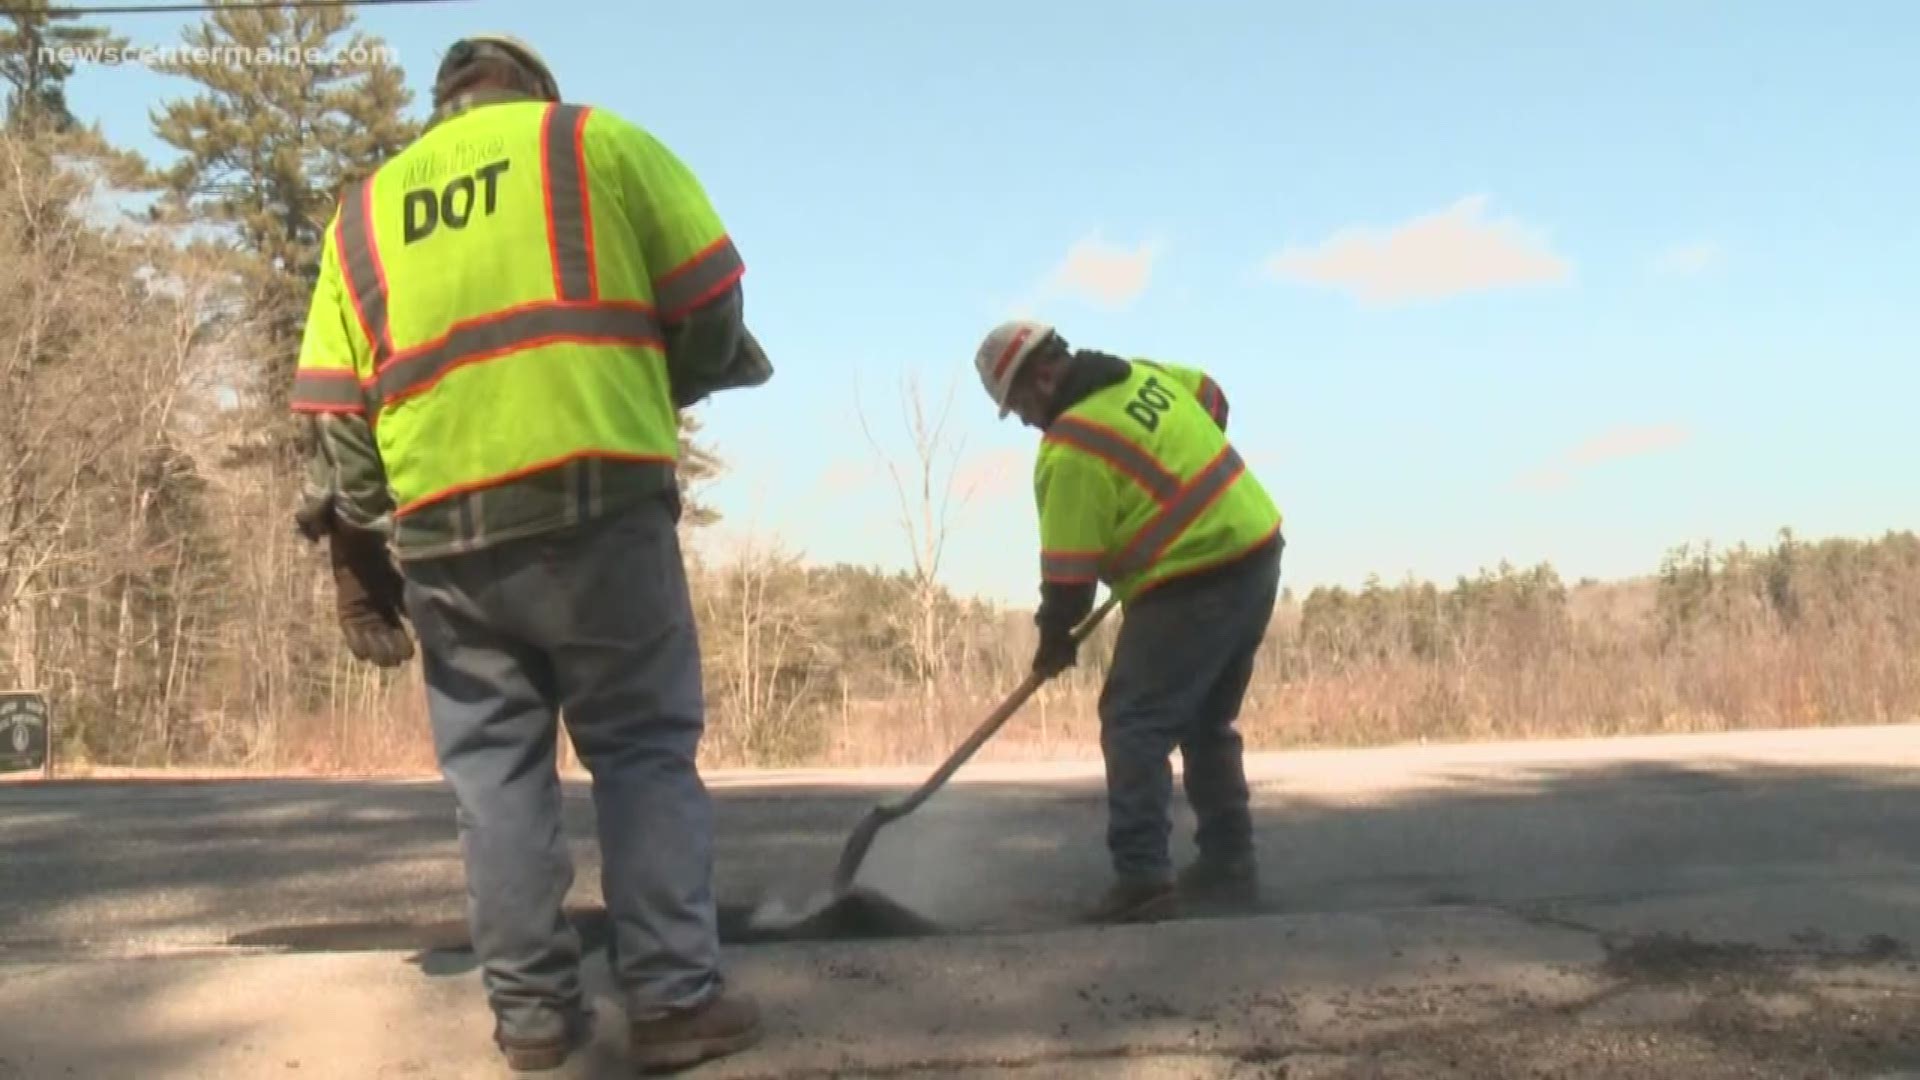 As potholes destroy roads and cars, the Maine DOT is looking for better ways to repair the streets.